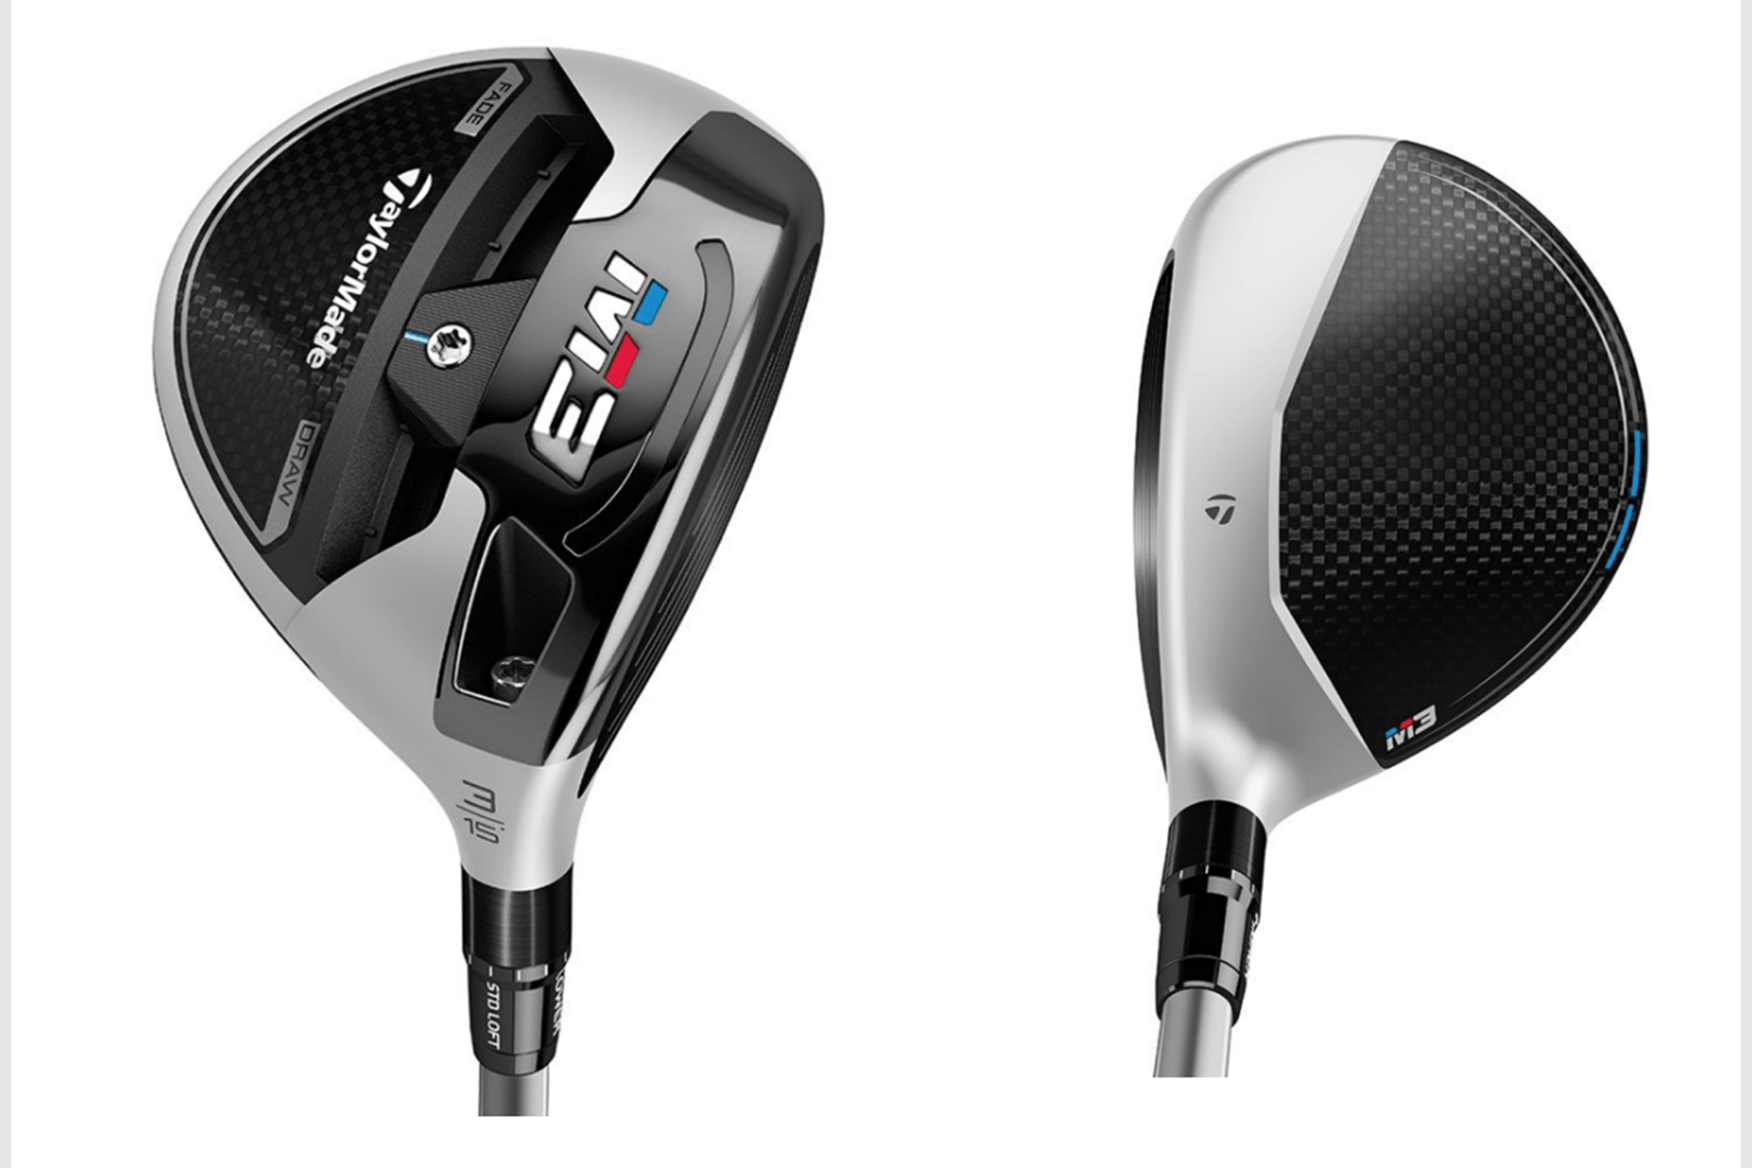 TaylorMade M3 Logo - TaylorMade M3 Fairway Wood Review | Equipment Reviews | Today's Golfer